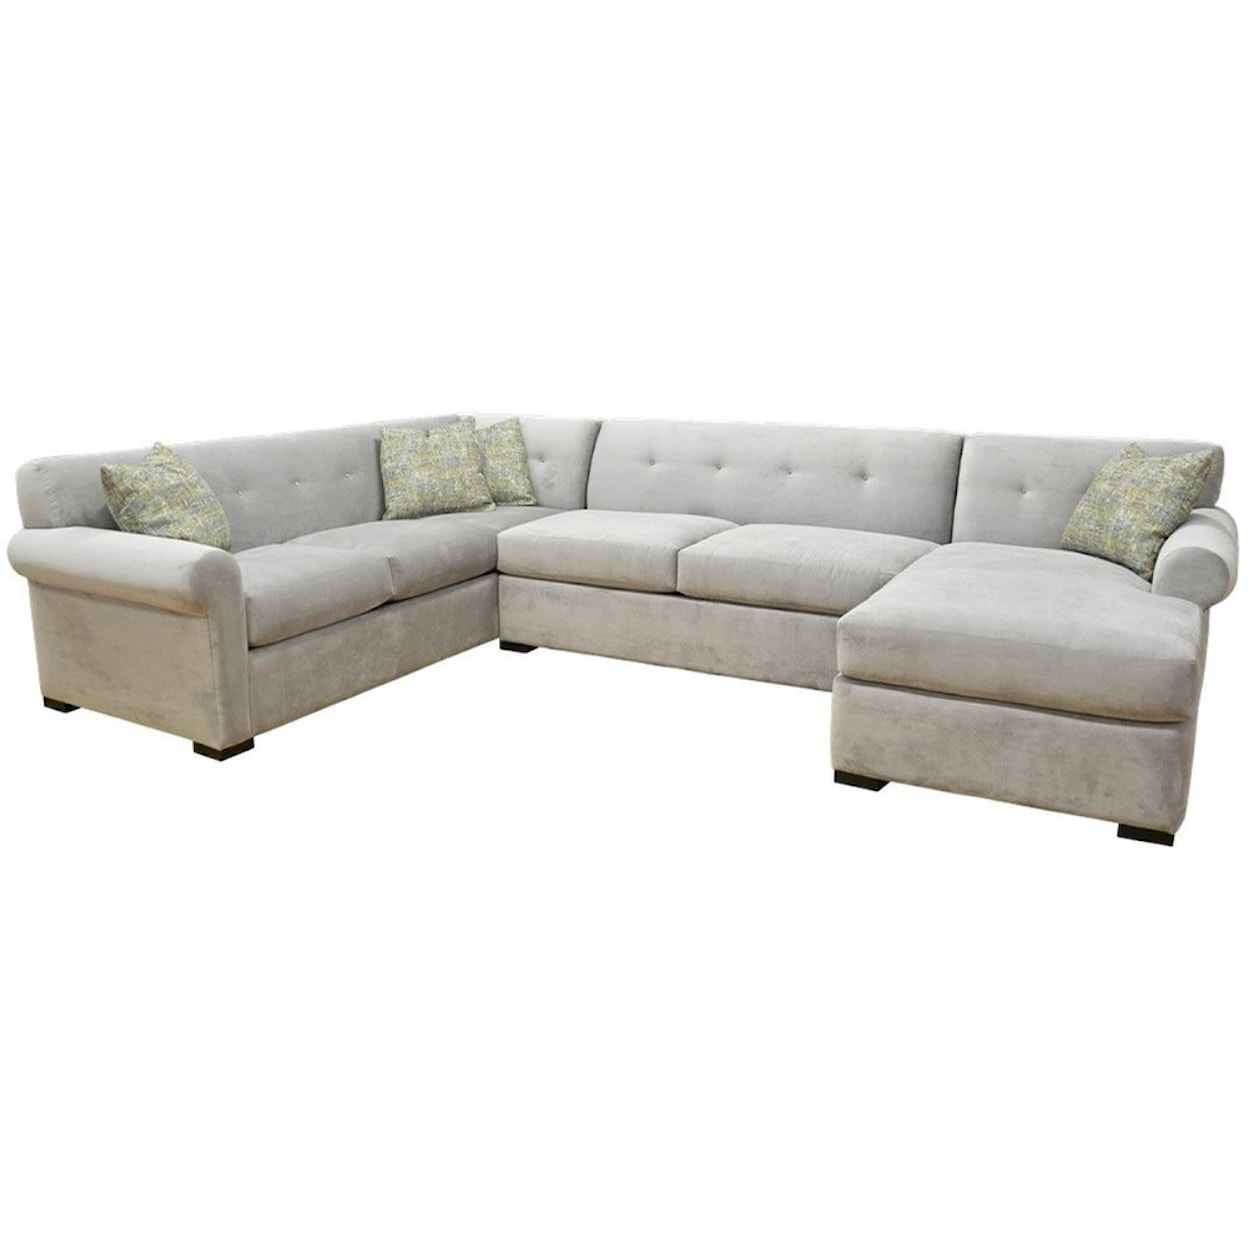 Jonathan Louis Johannah Sectional with Right-Facing Chaise